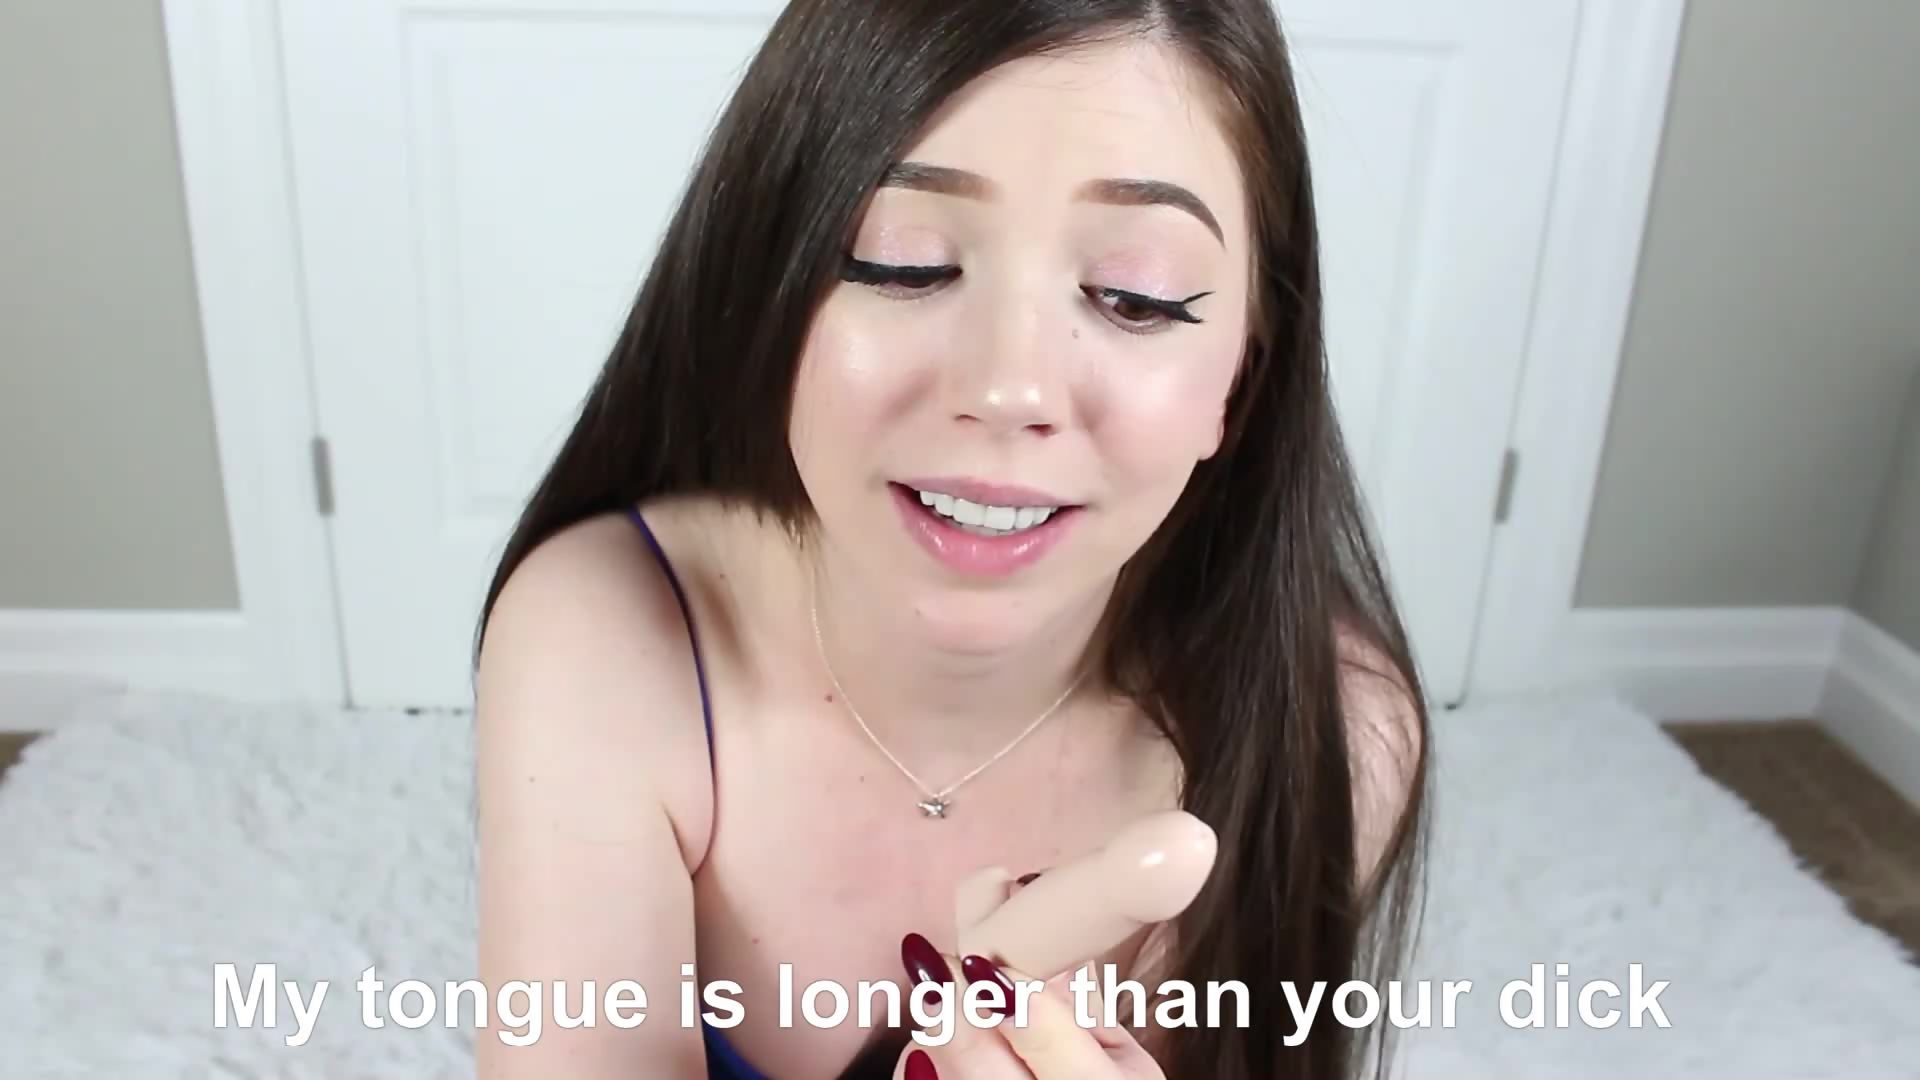 Tongue Is Longer Than Your Dick